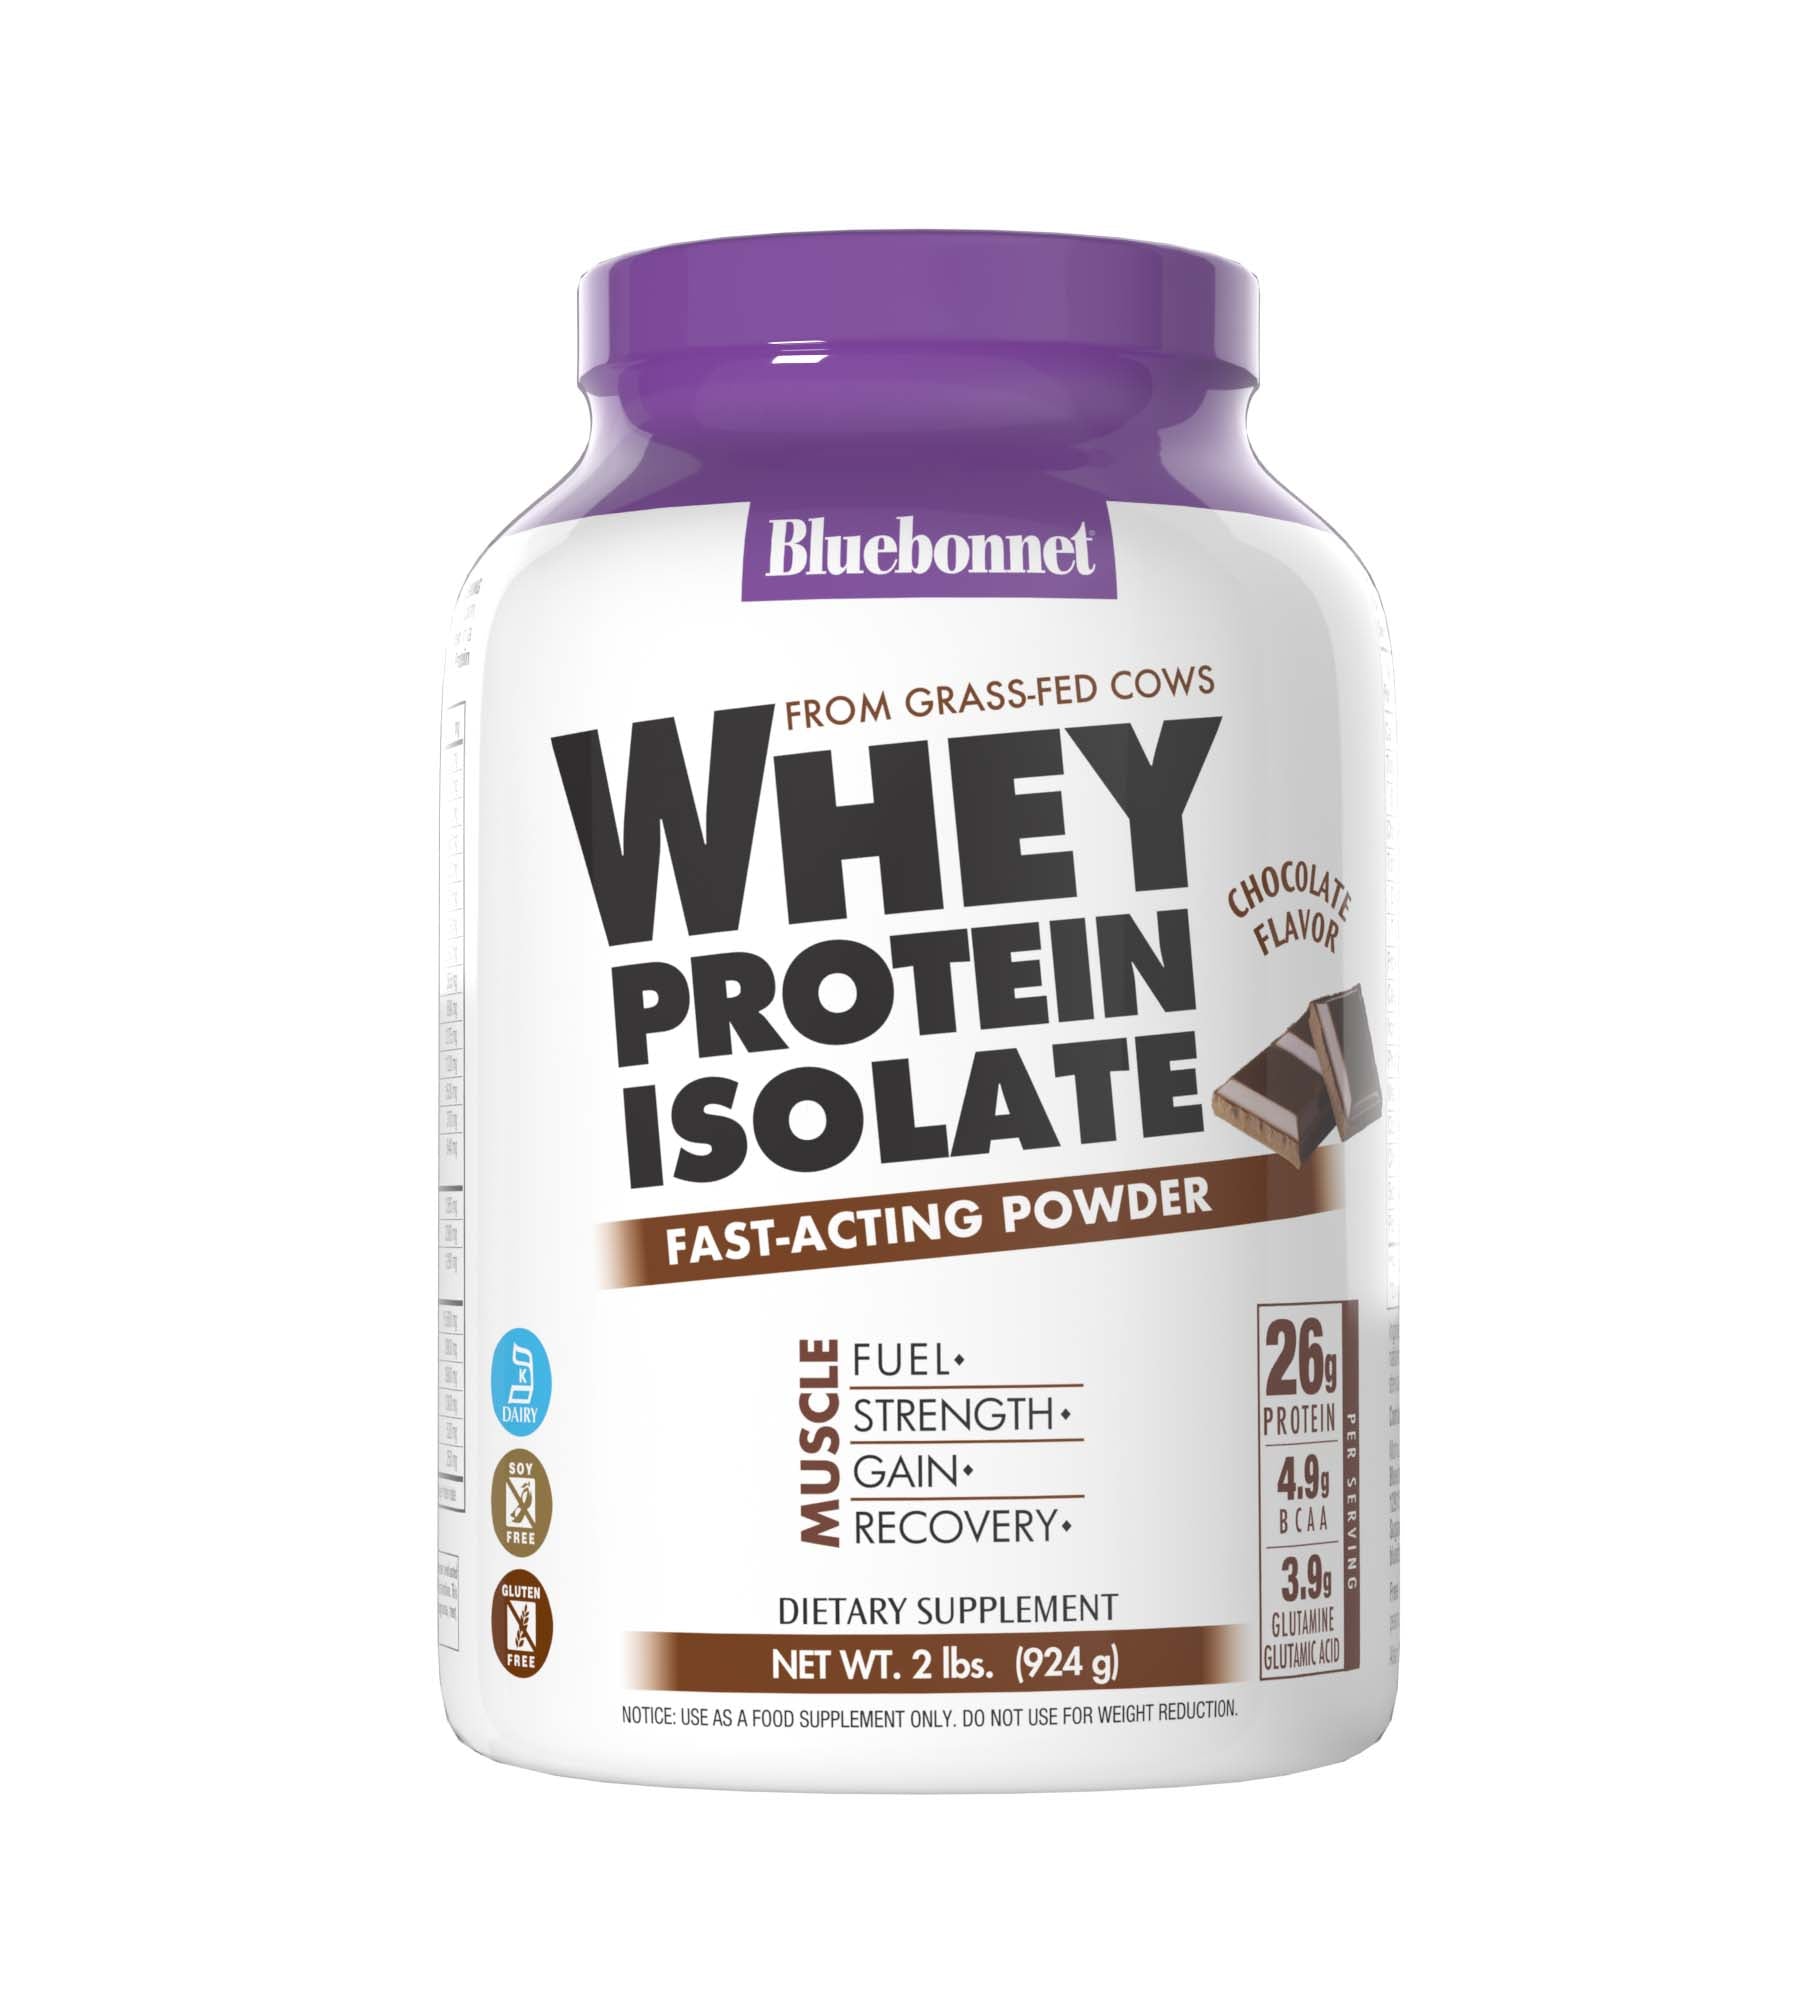 Bluebonnet's Whey Protein Isolate Powder. Chocolate flavor. 26 g of protein, 4.9 g BCAA and 3.9 g Glutamine Glutamic Acid per serving. #size_2 lb